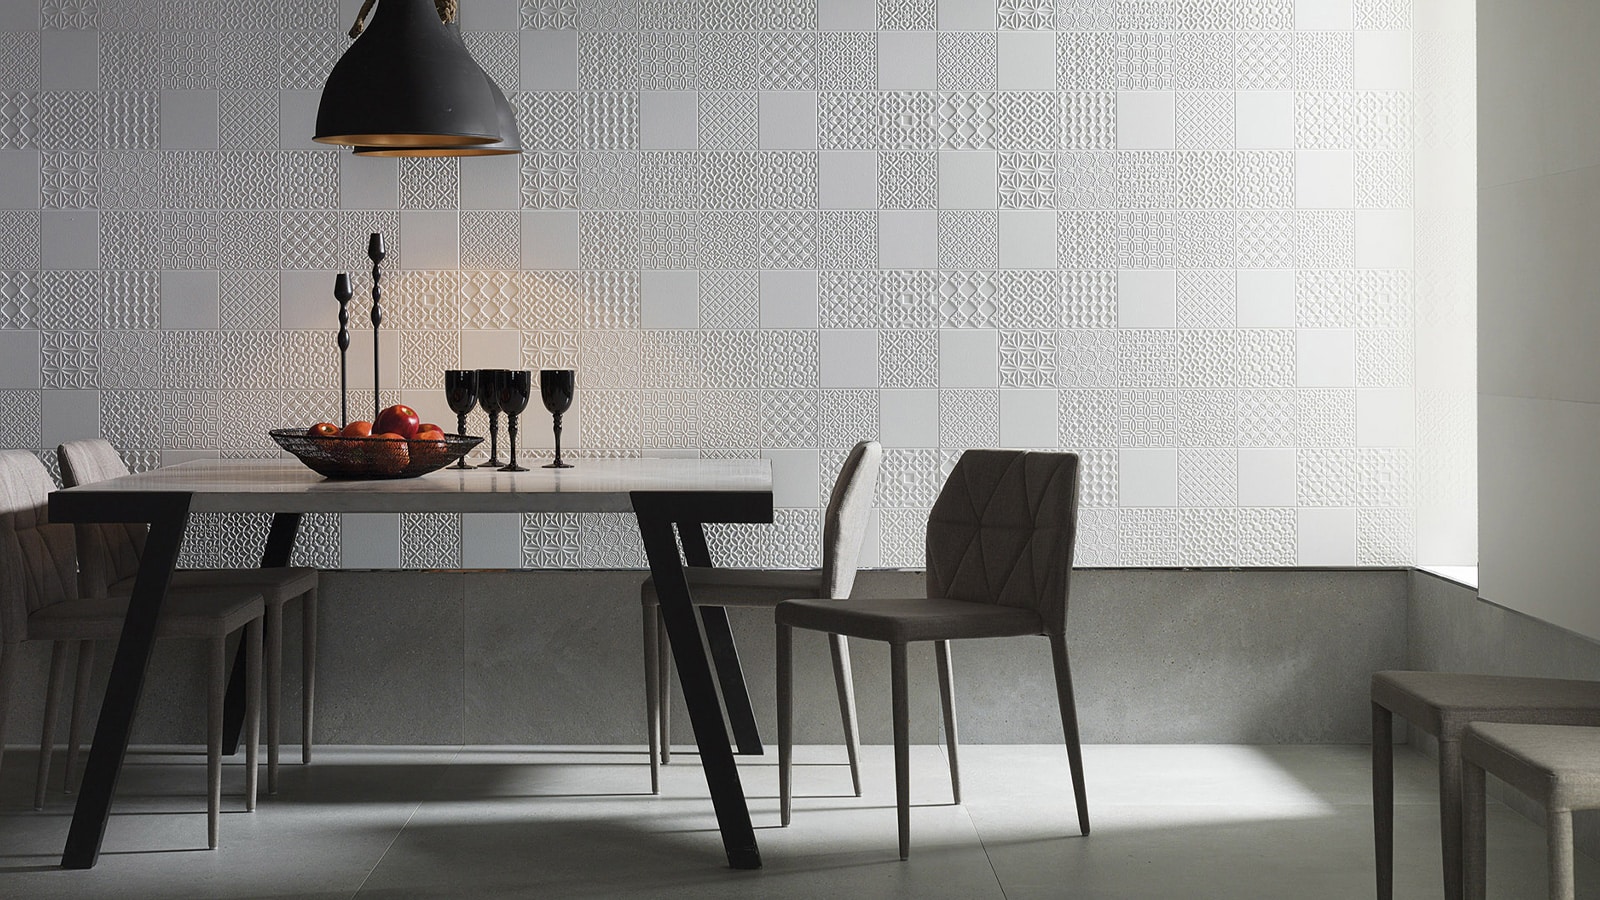 Inject inspiration into walls with large formats from Porcelanosa